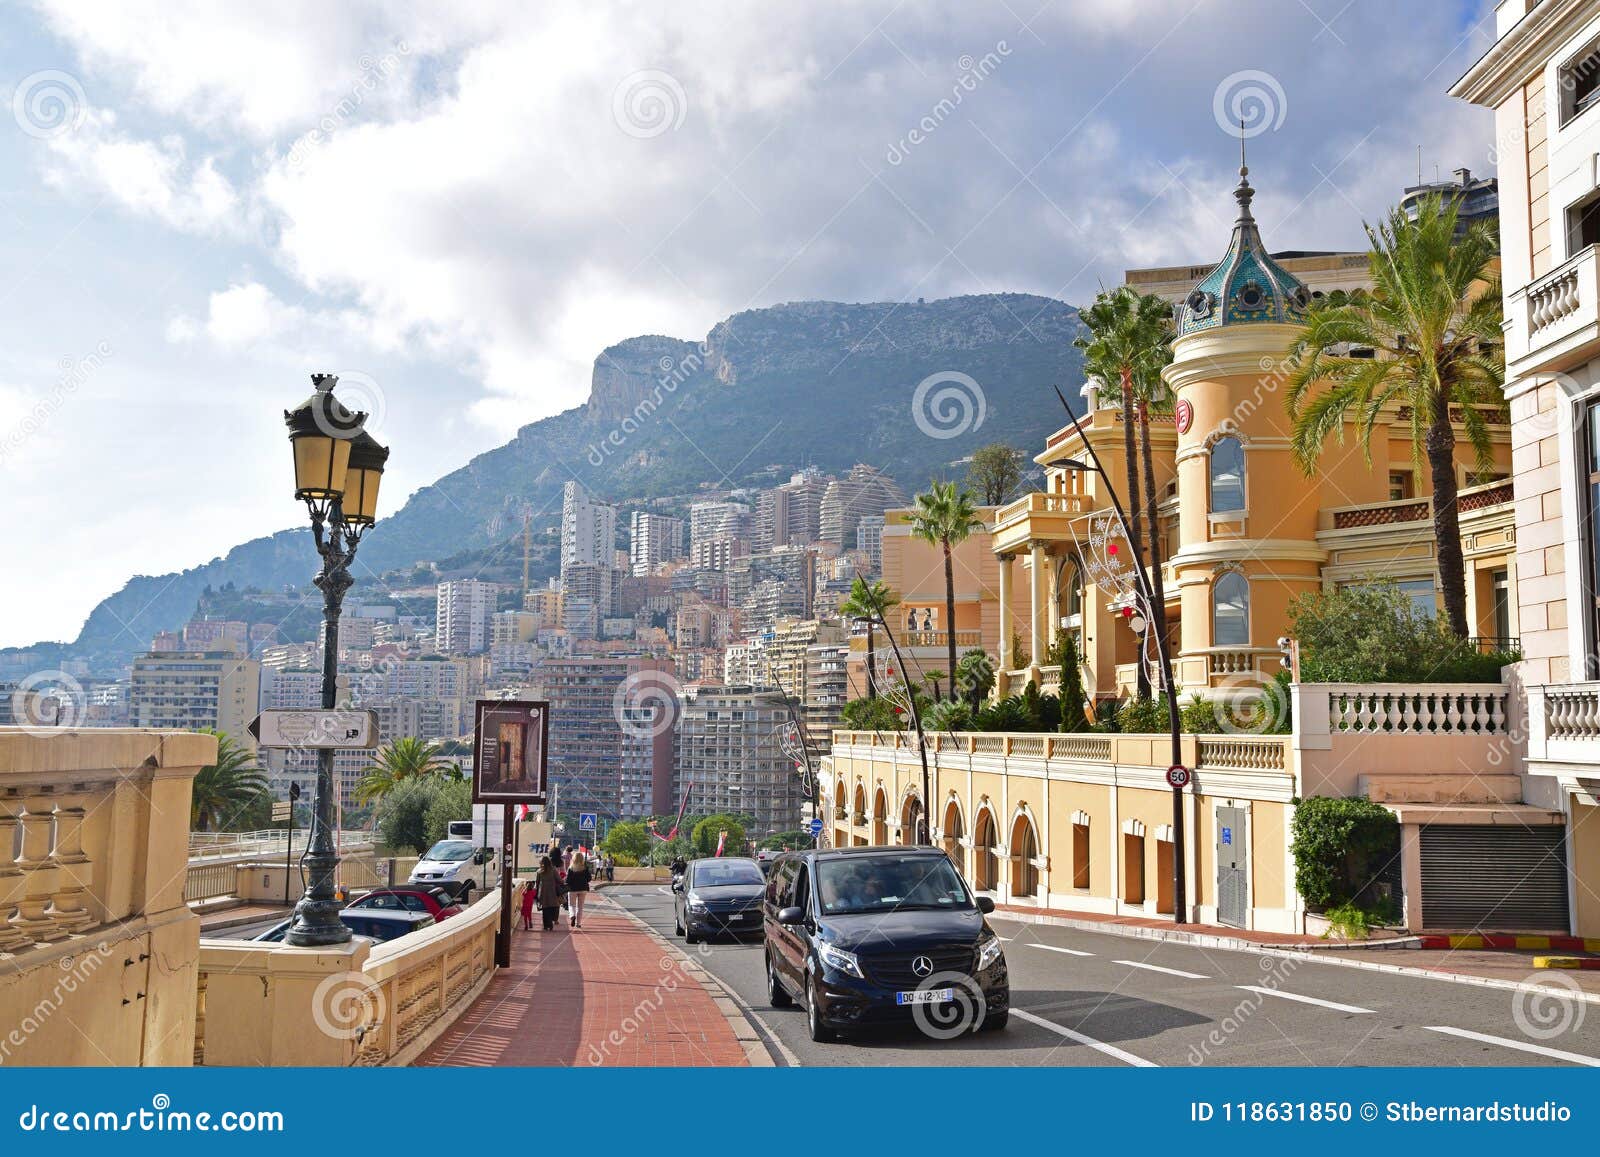 Beautiful Main Road of the Principality of Monaco with Spacious, Well